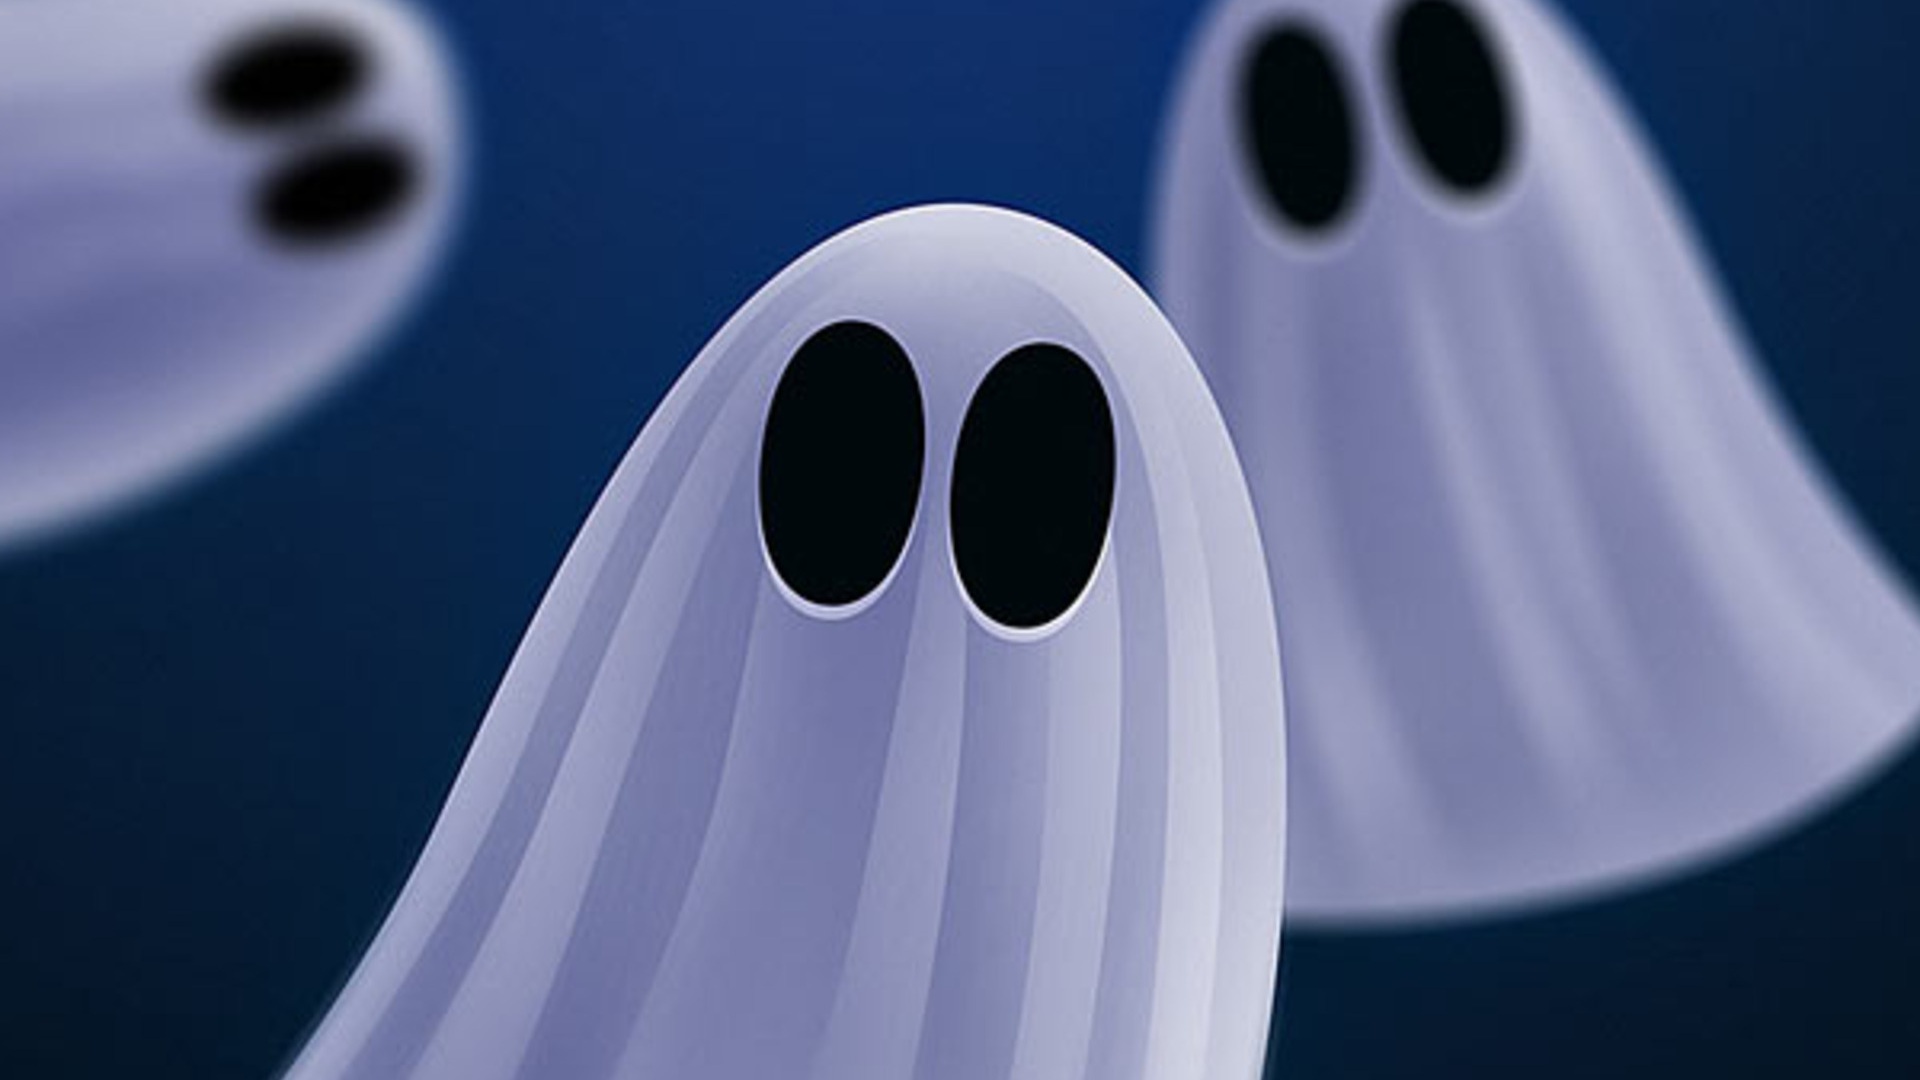 Funny Ghost Wallpapers